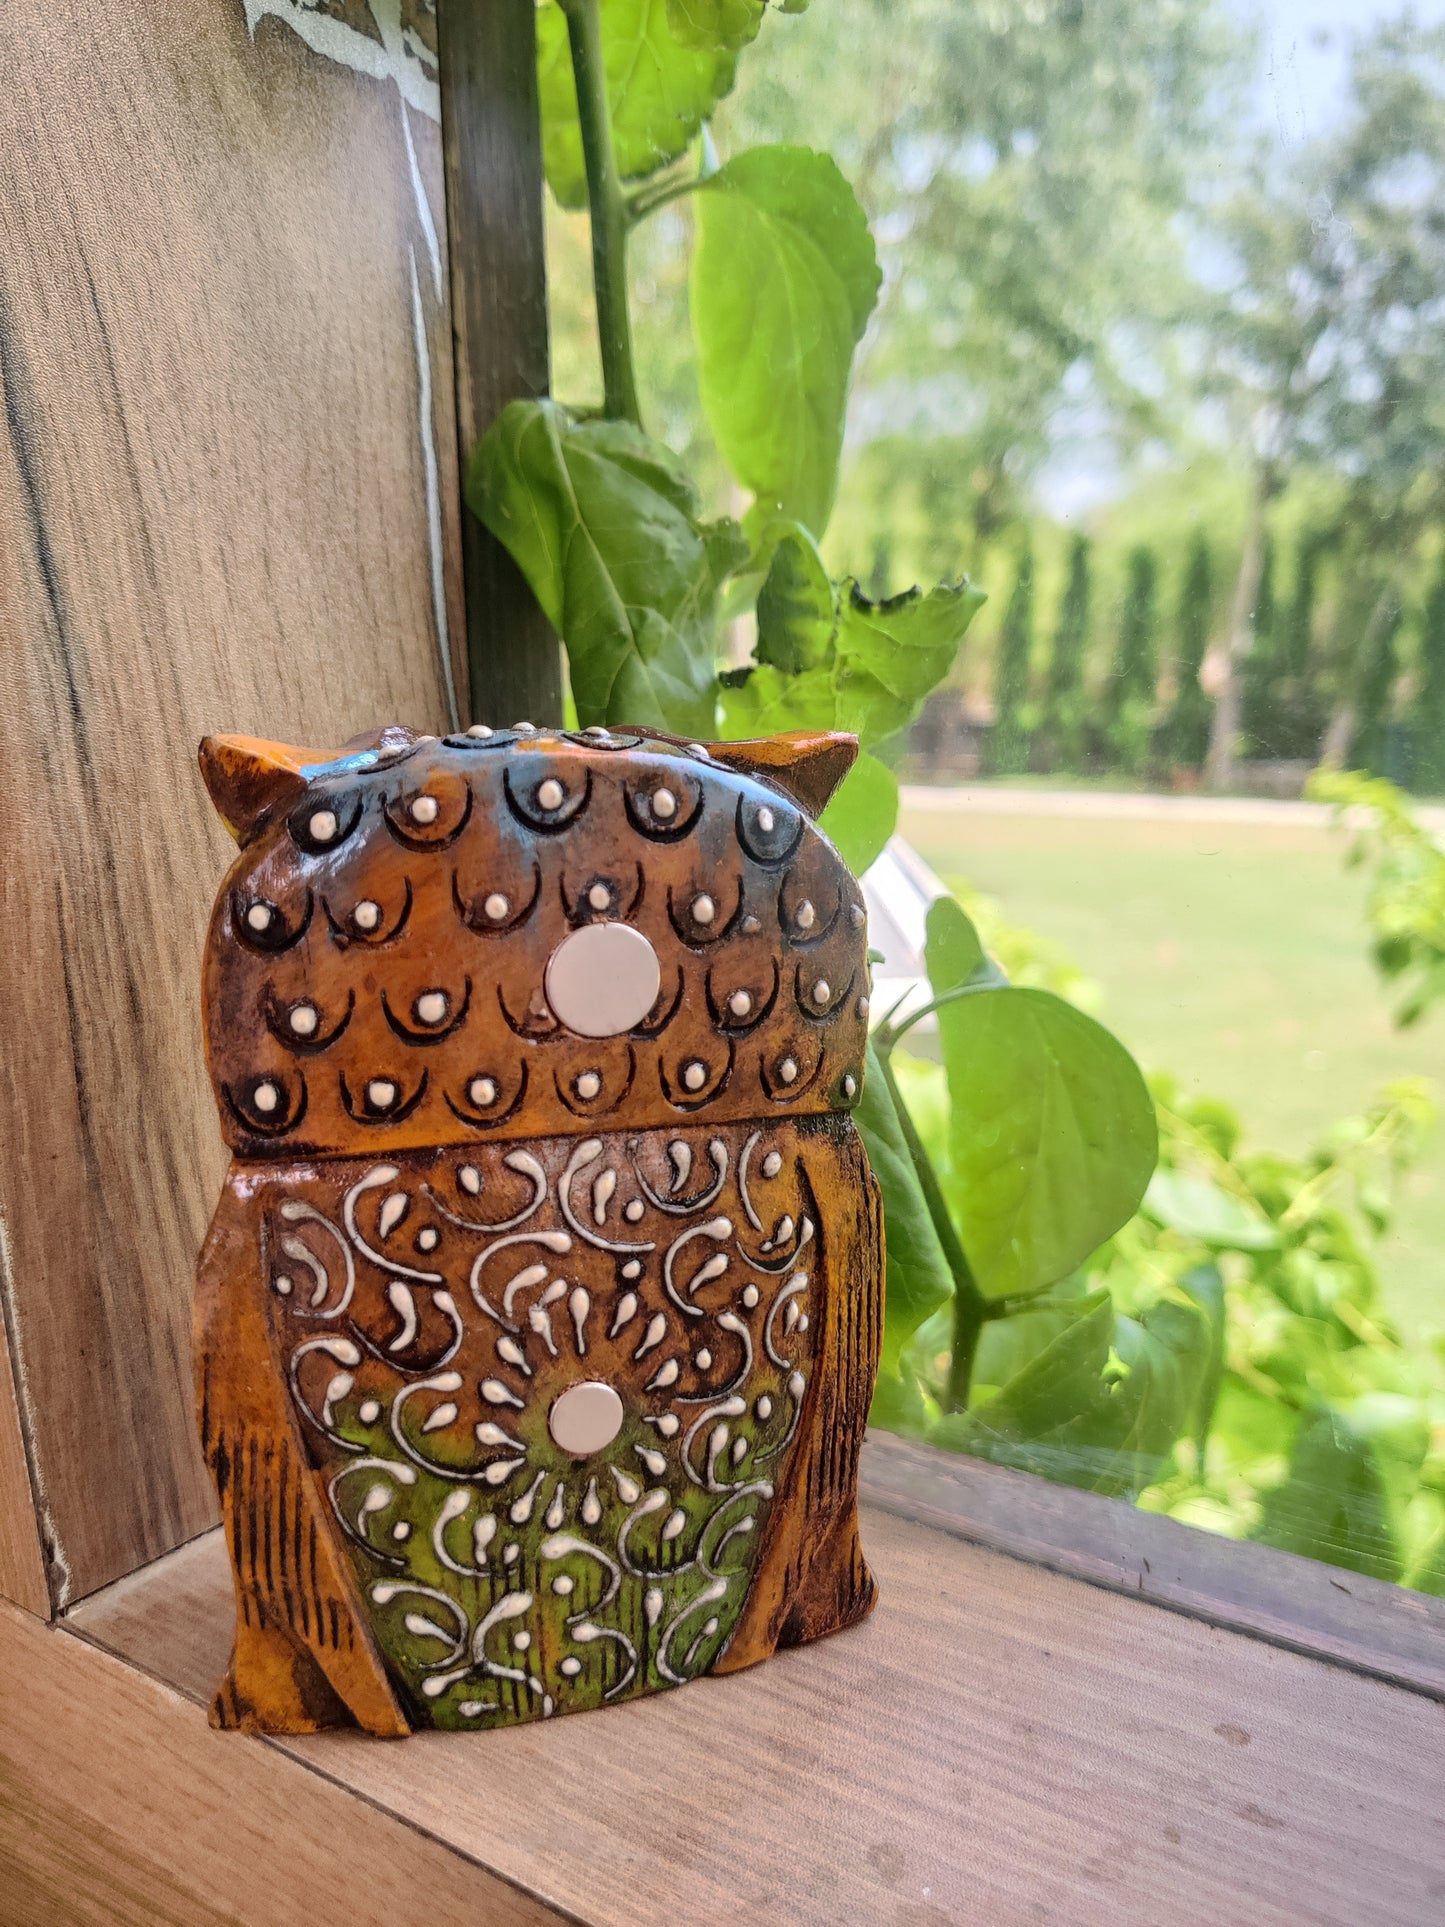 Wooden Owl painted